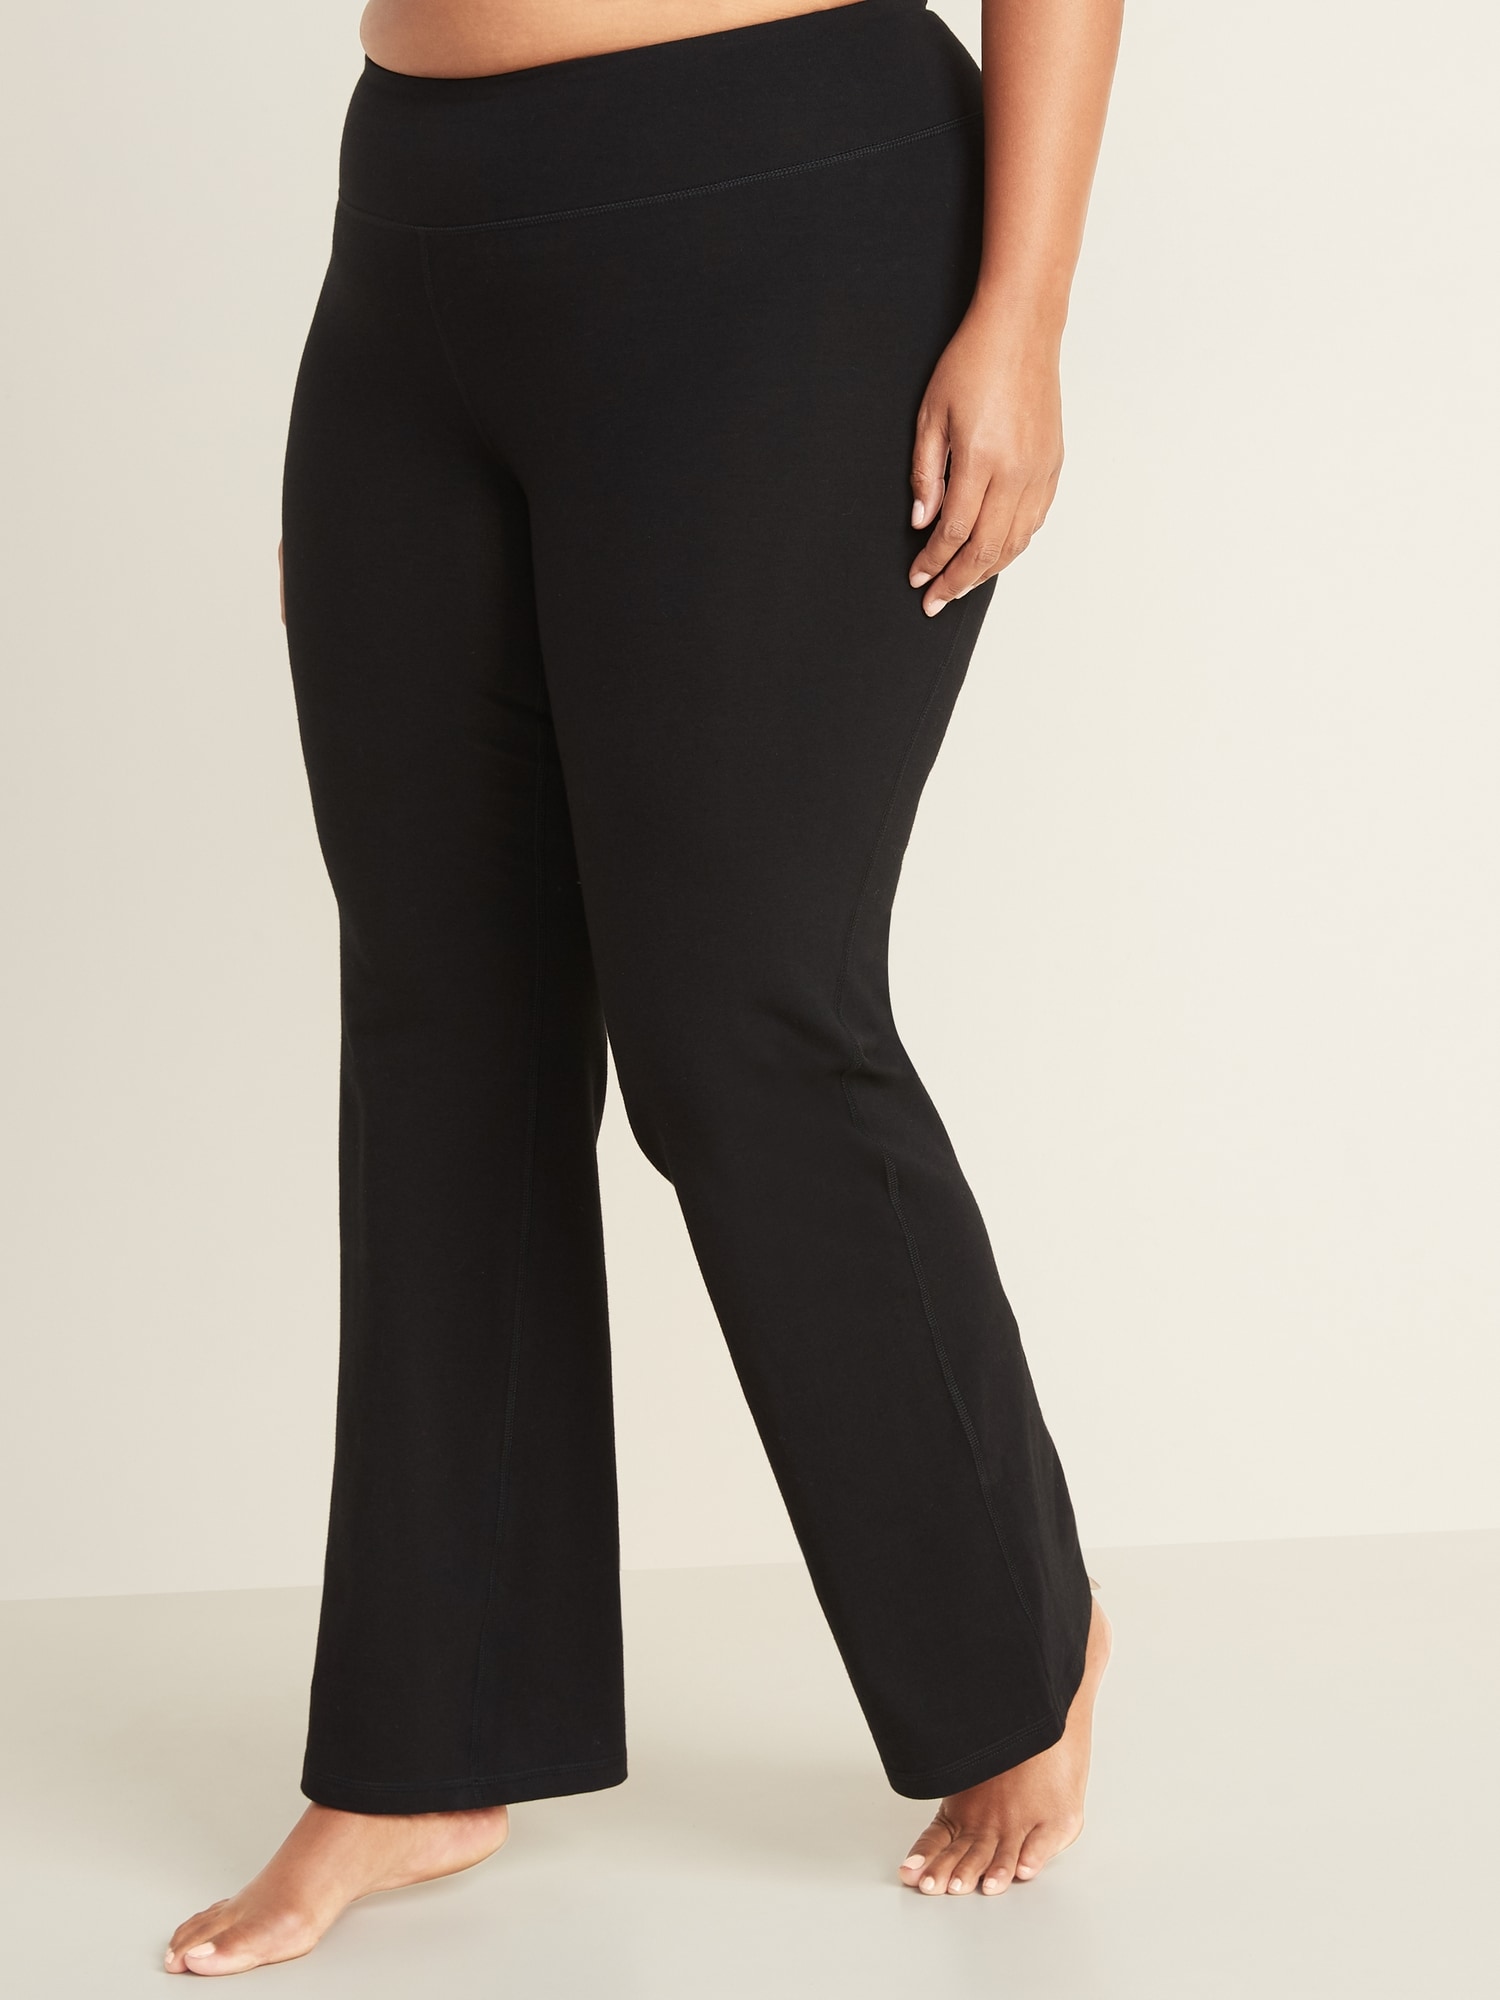 High-Waisted Plus-Size Boot-Cut Yoga 